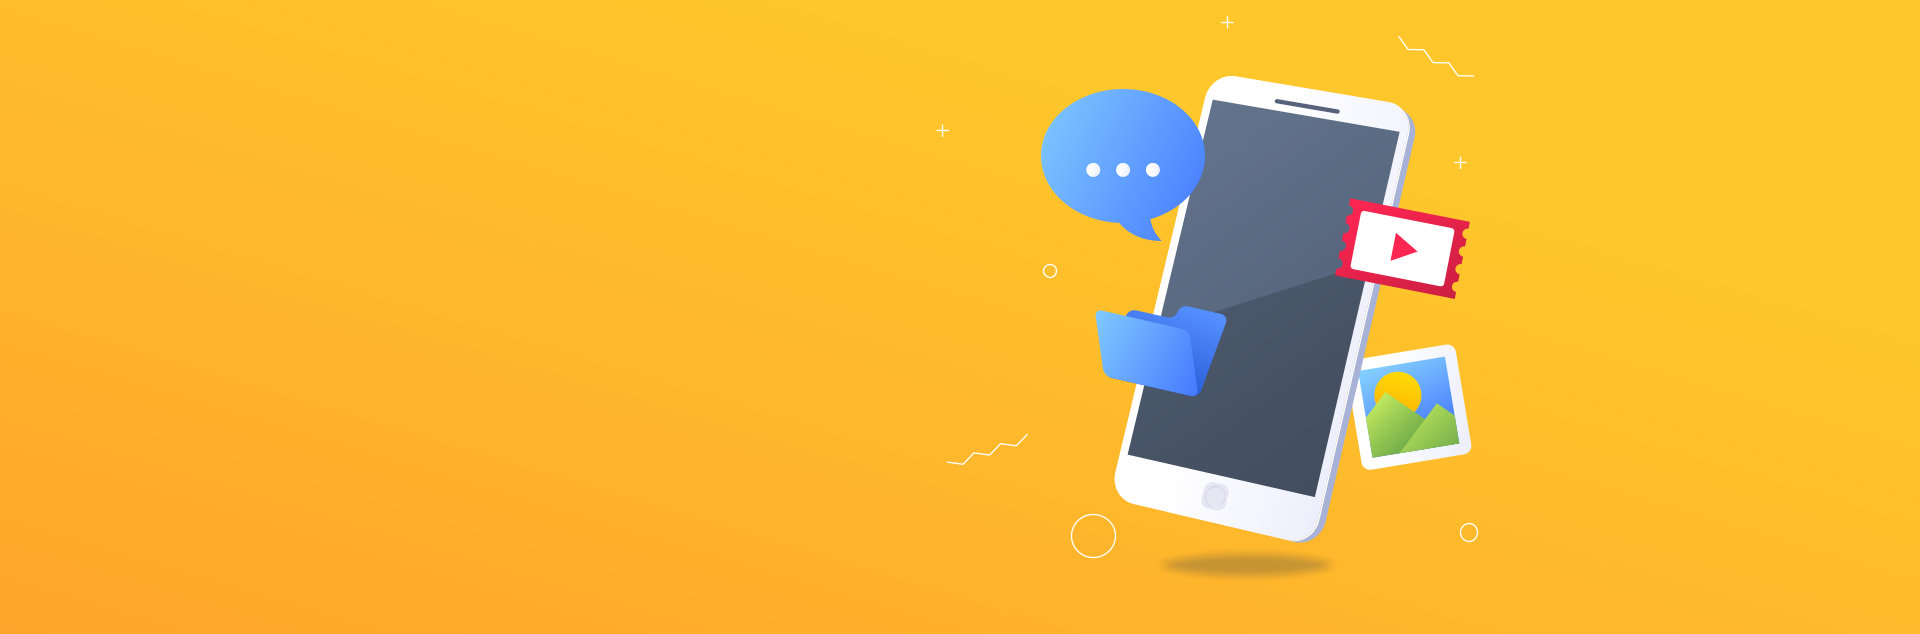 illustrations of phone with mobile apps